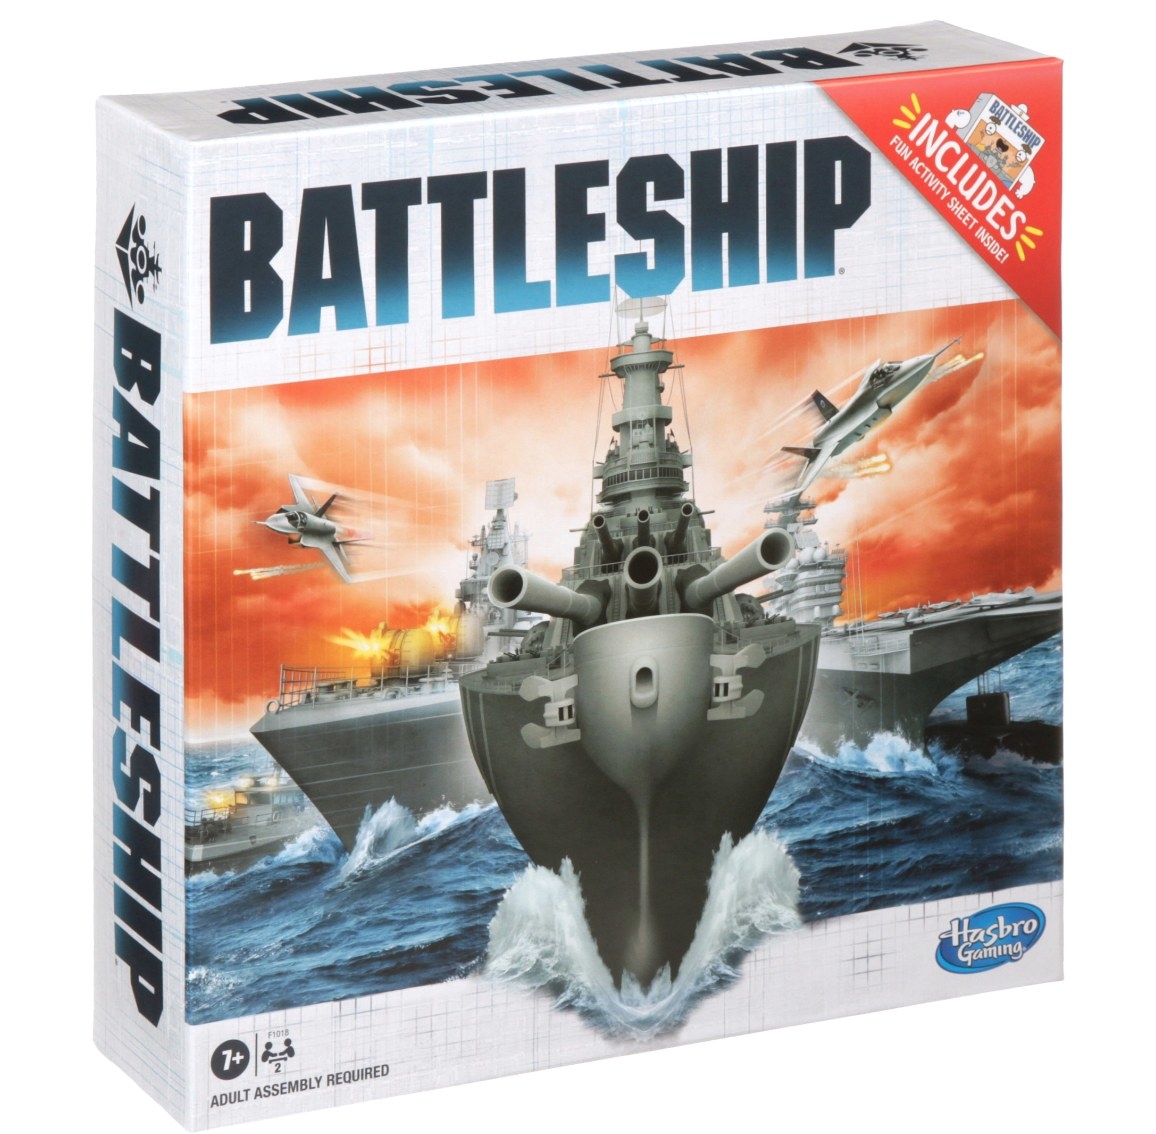 The battleship game in its box